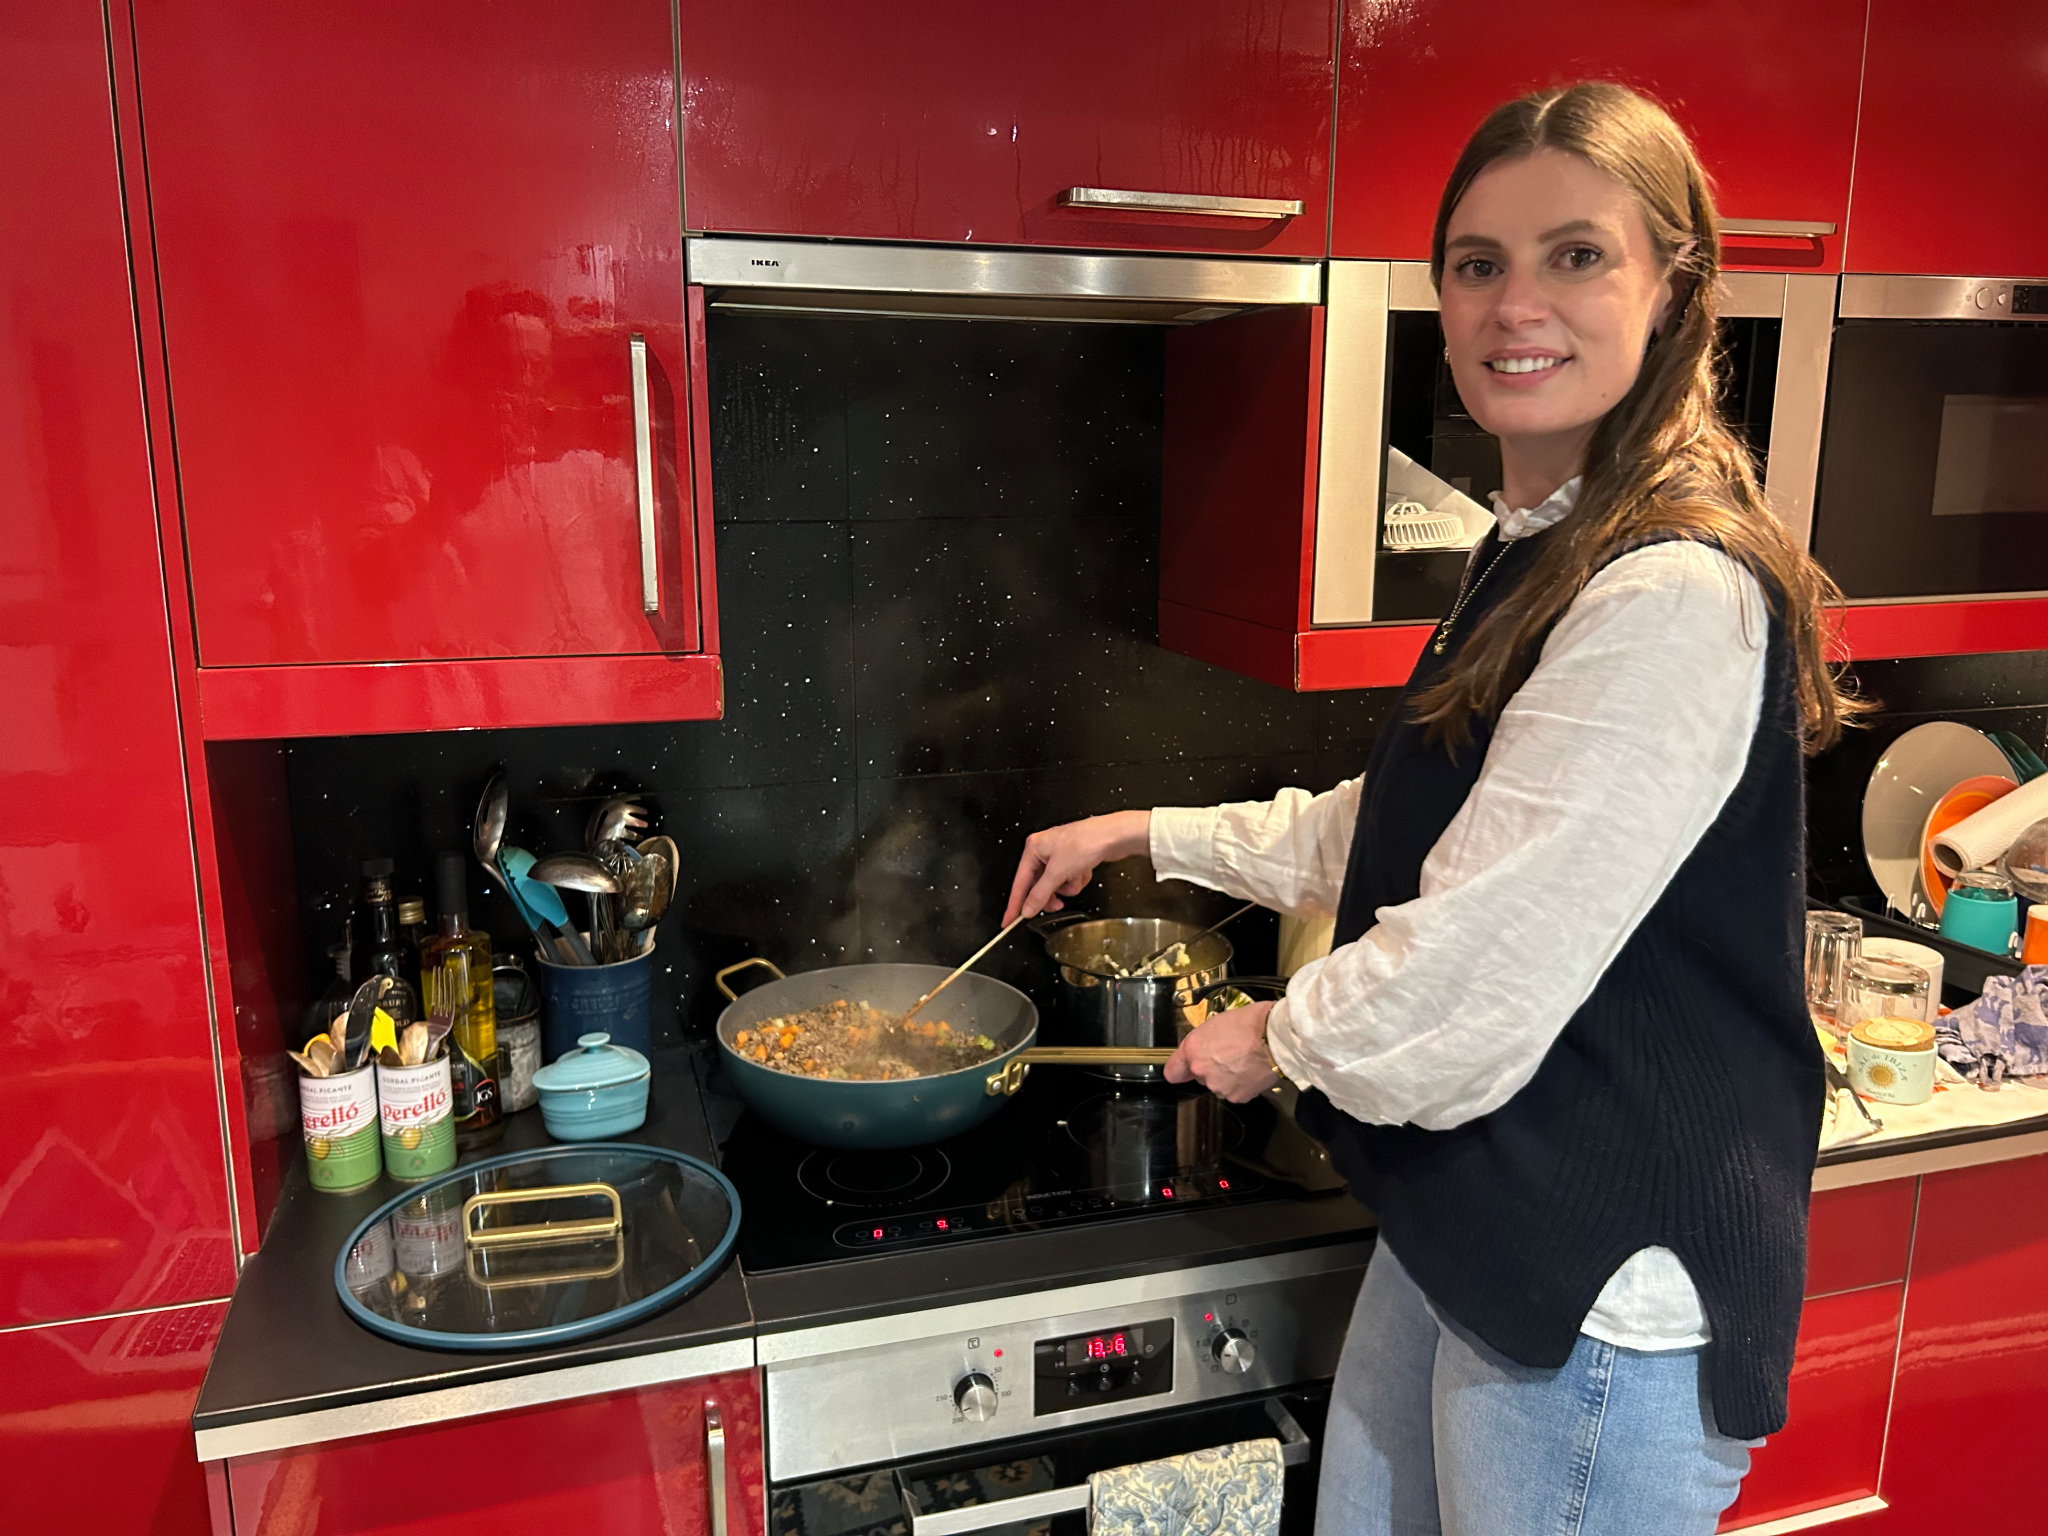 Emma putting the pan through its paces by whipping up some delicious recipes